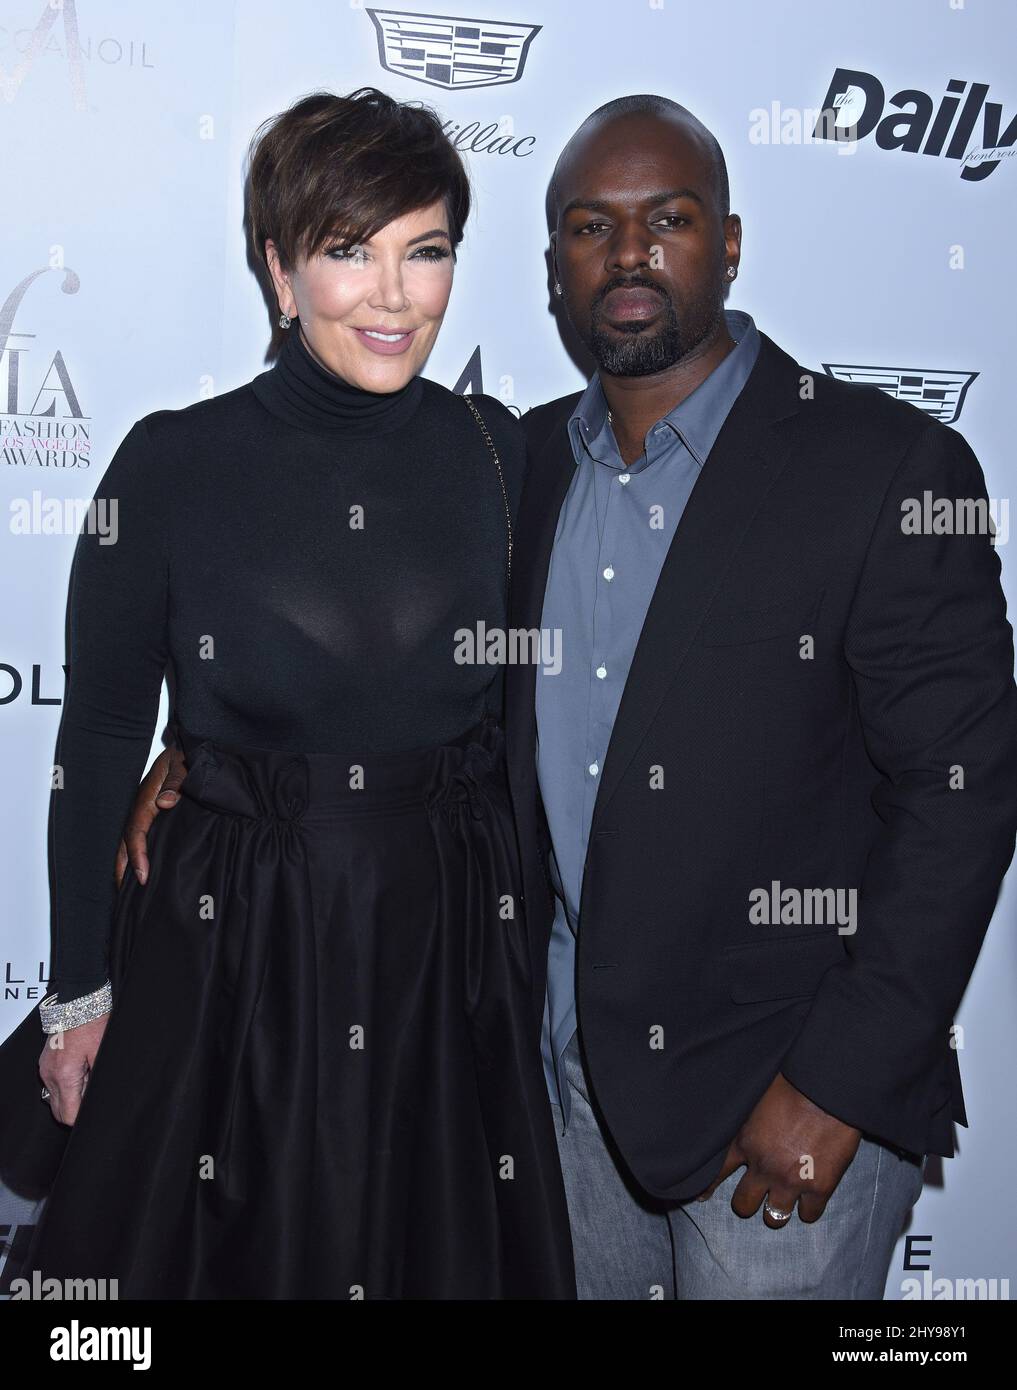 Kris Jenner and Corey Gamble leave the 'E.Goyard' store on September  News Photo - Getty Images